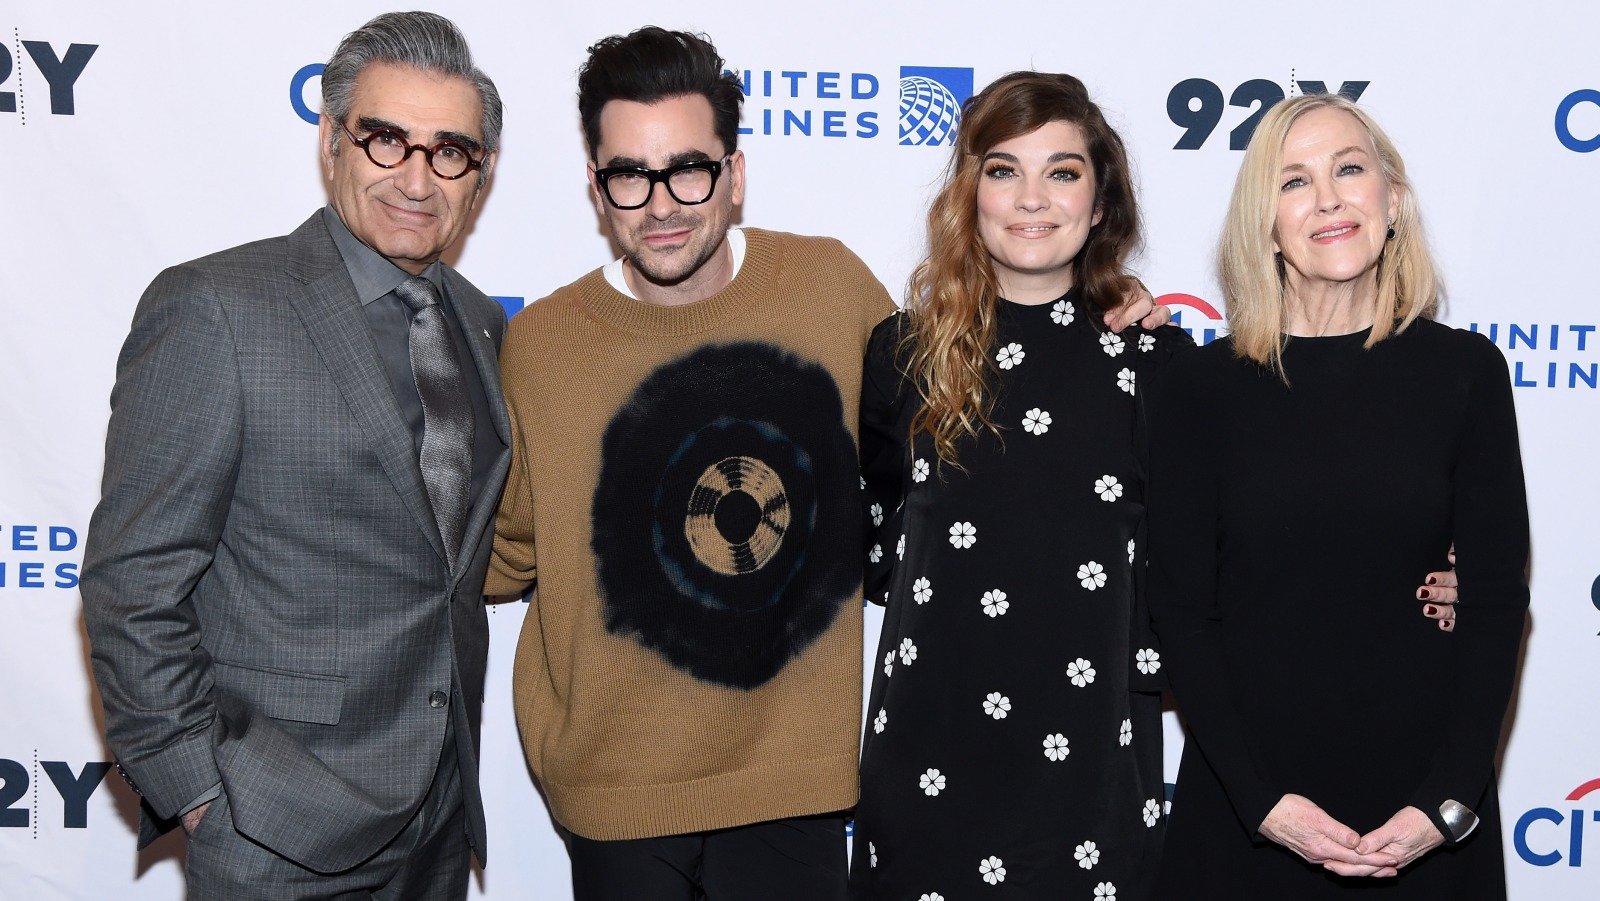 The Real Life Partners Of The Schitt's Creek Cast